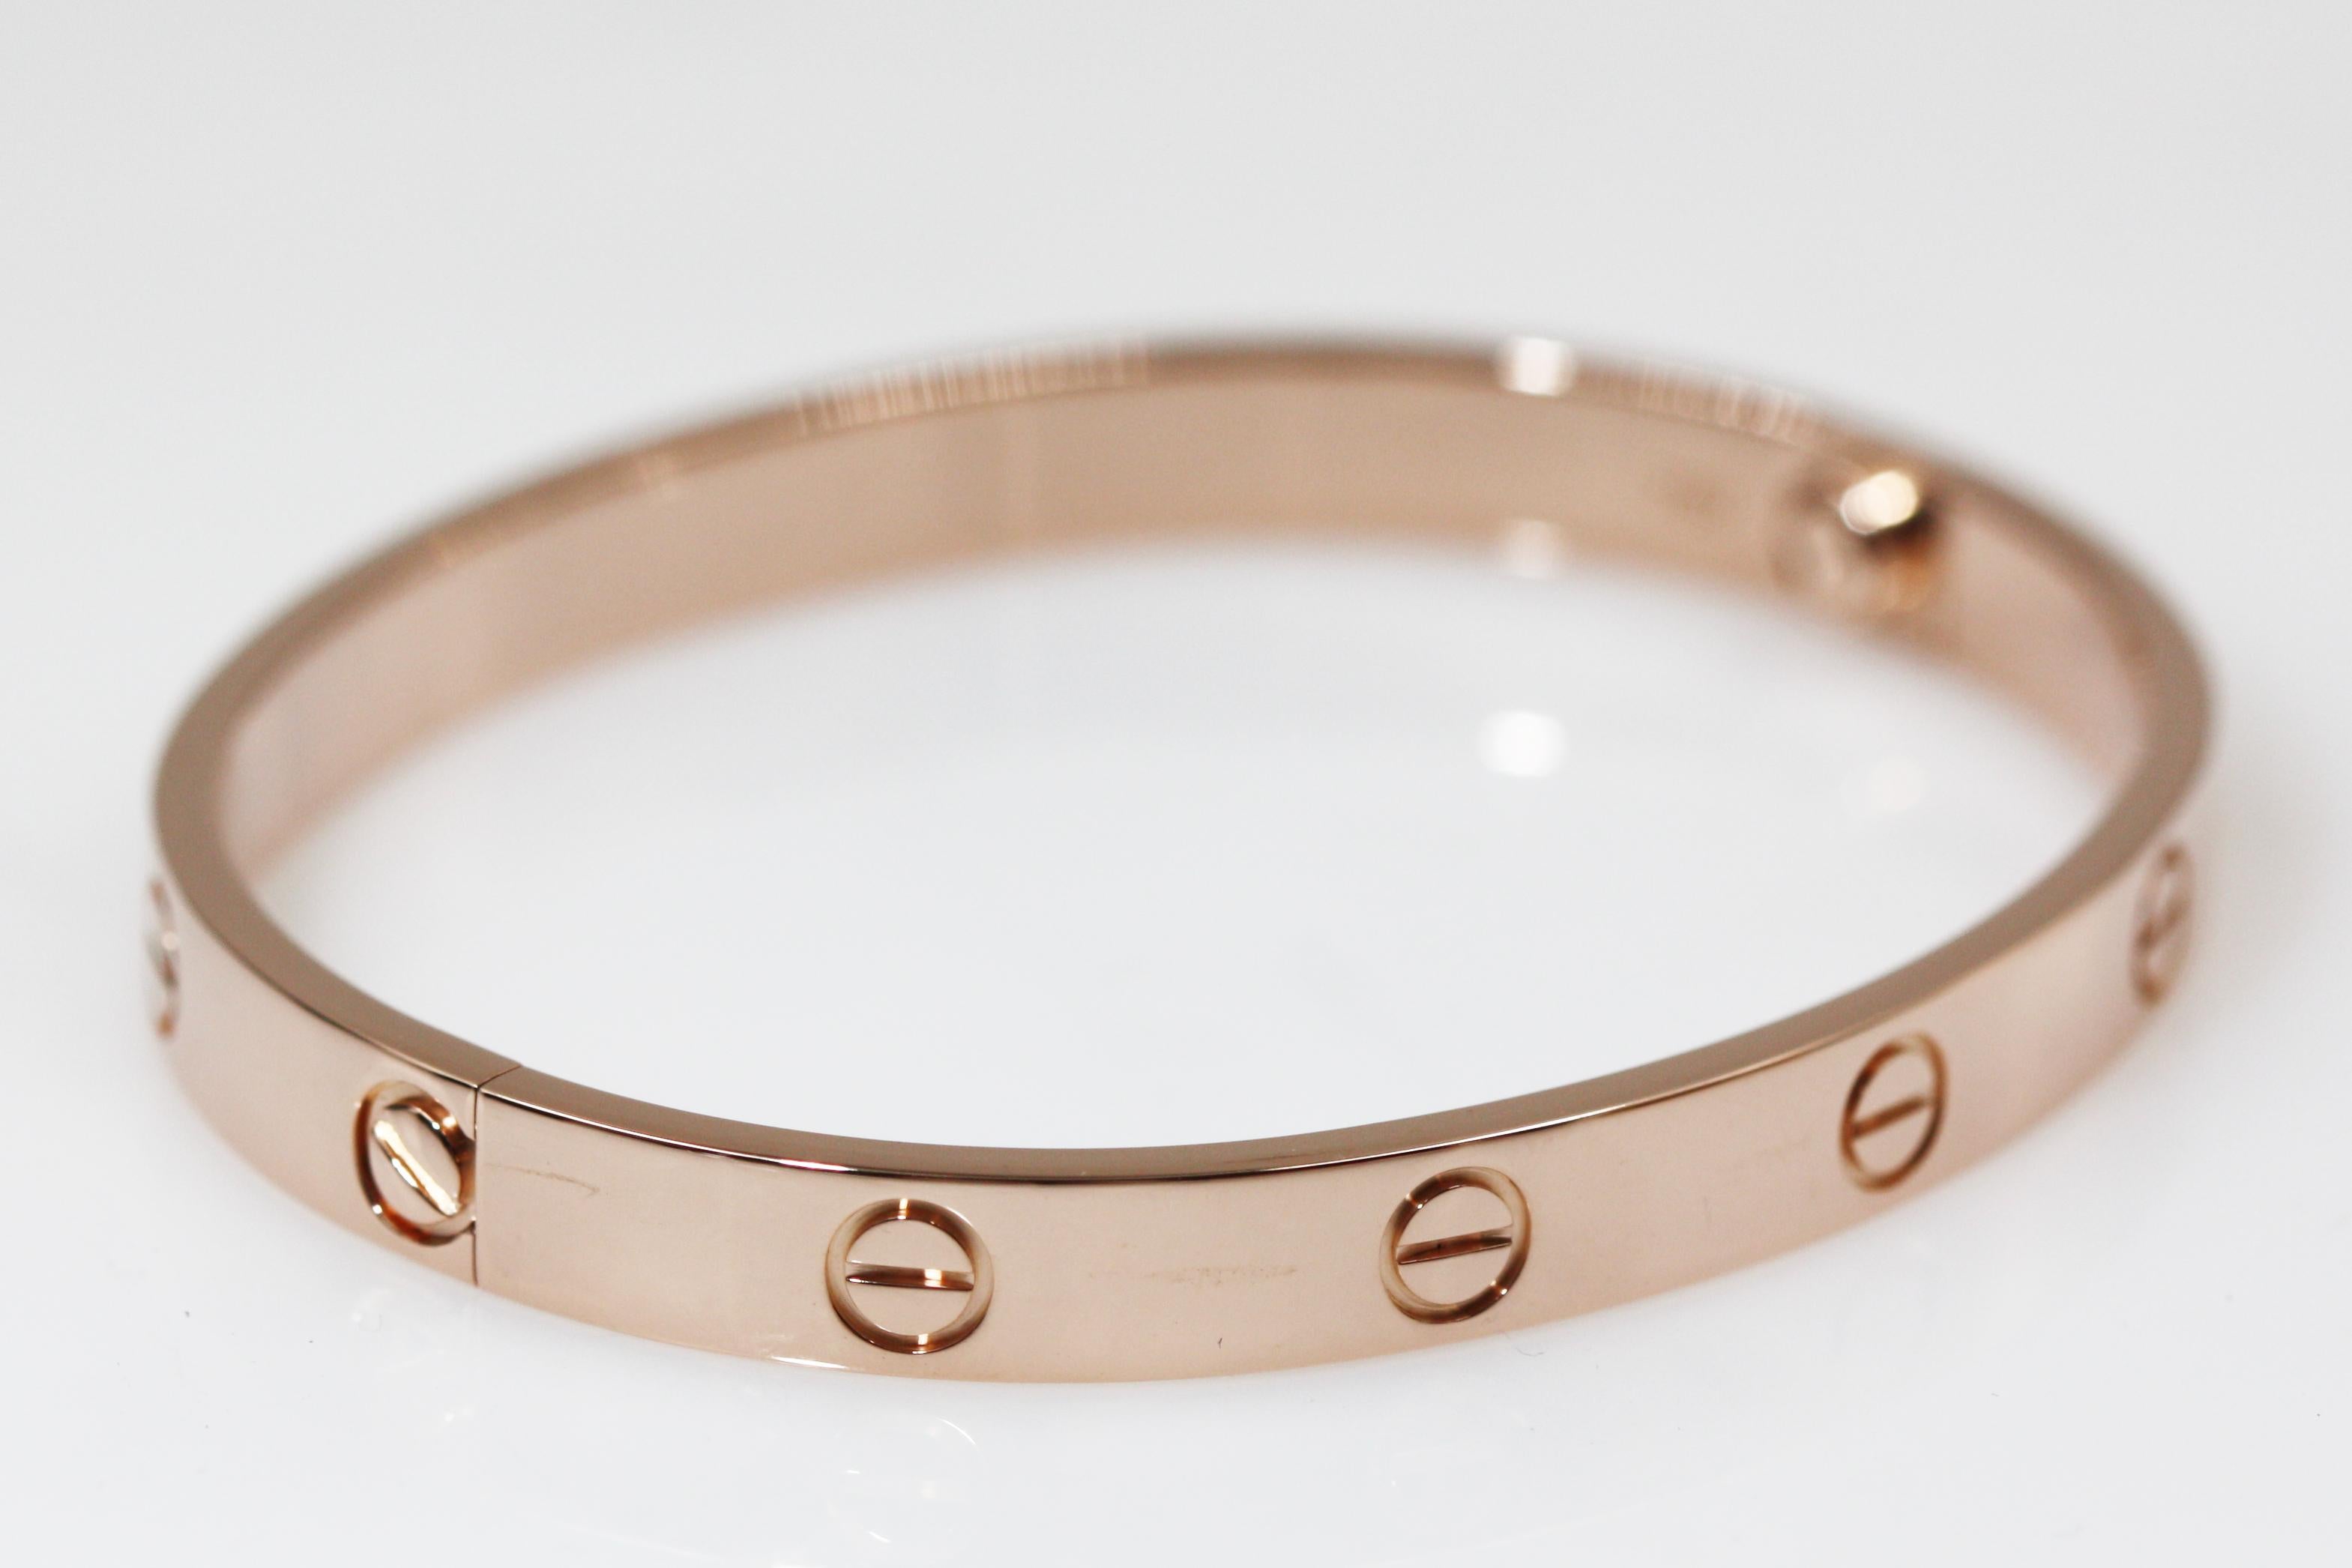 A Beautiful bracelet from Cartier Love collection, made in 18K rose gold. The bracelet have the iconic screw motif. REF: B6035617

Size 21
We have other size available, please feel free to ask.

This item will come with an original box and